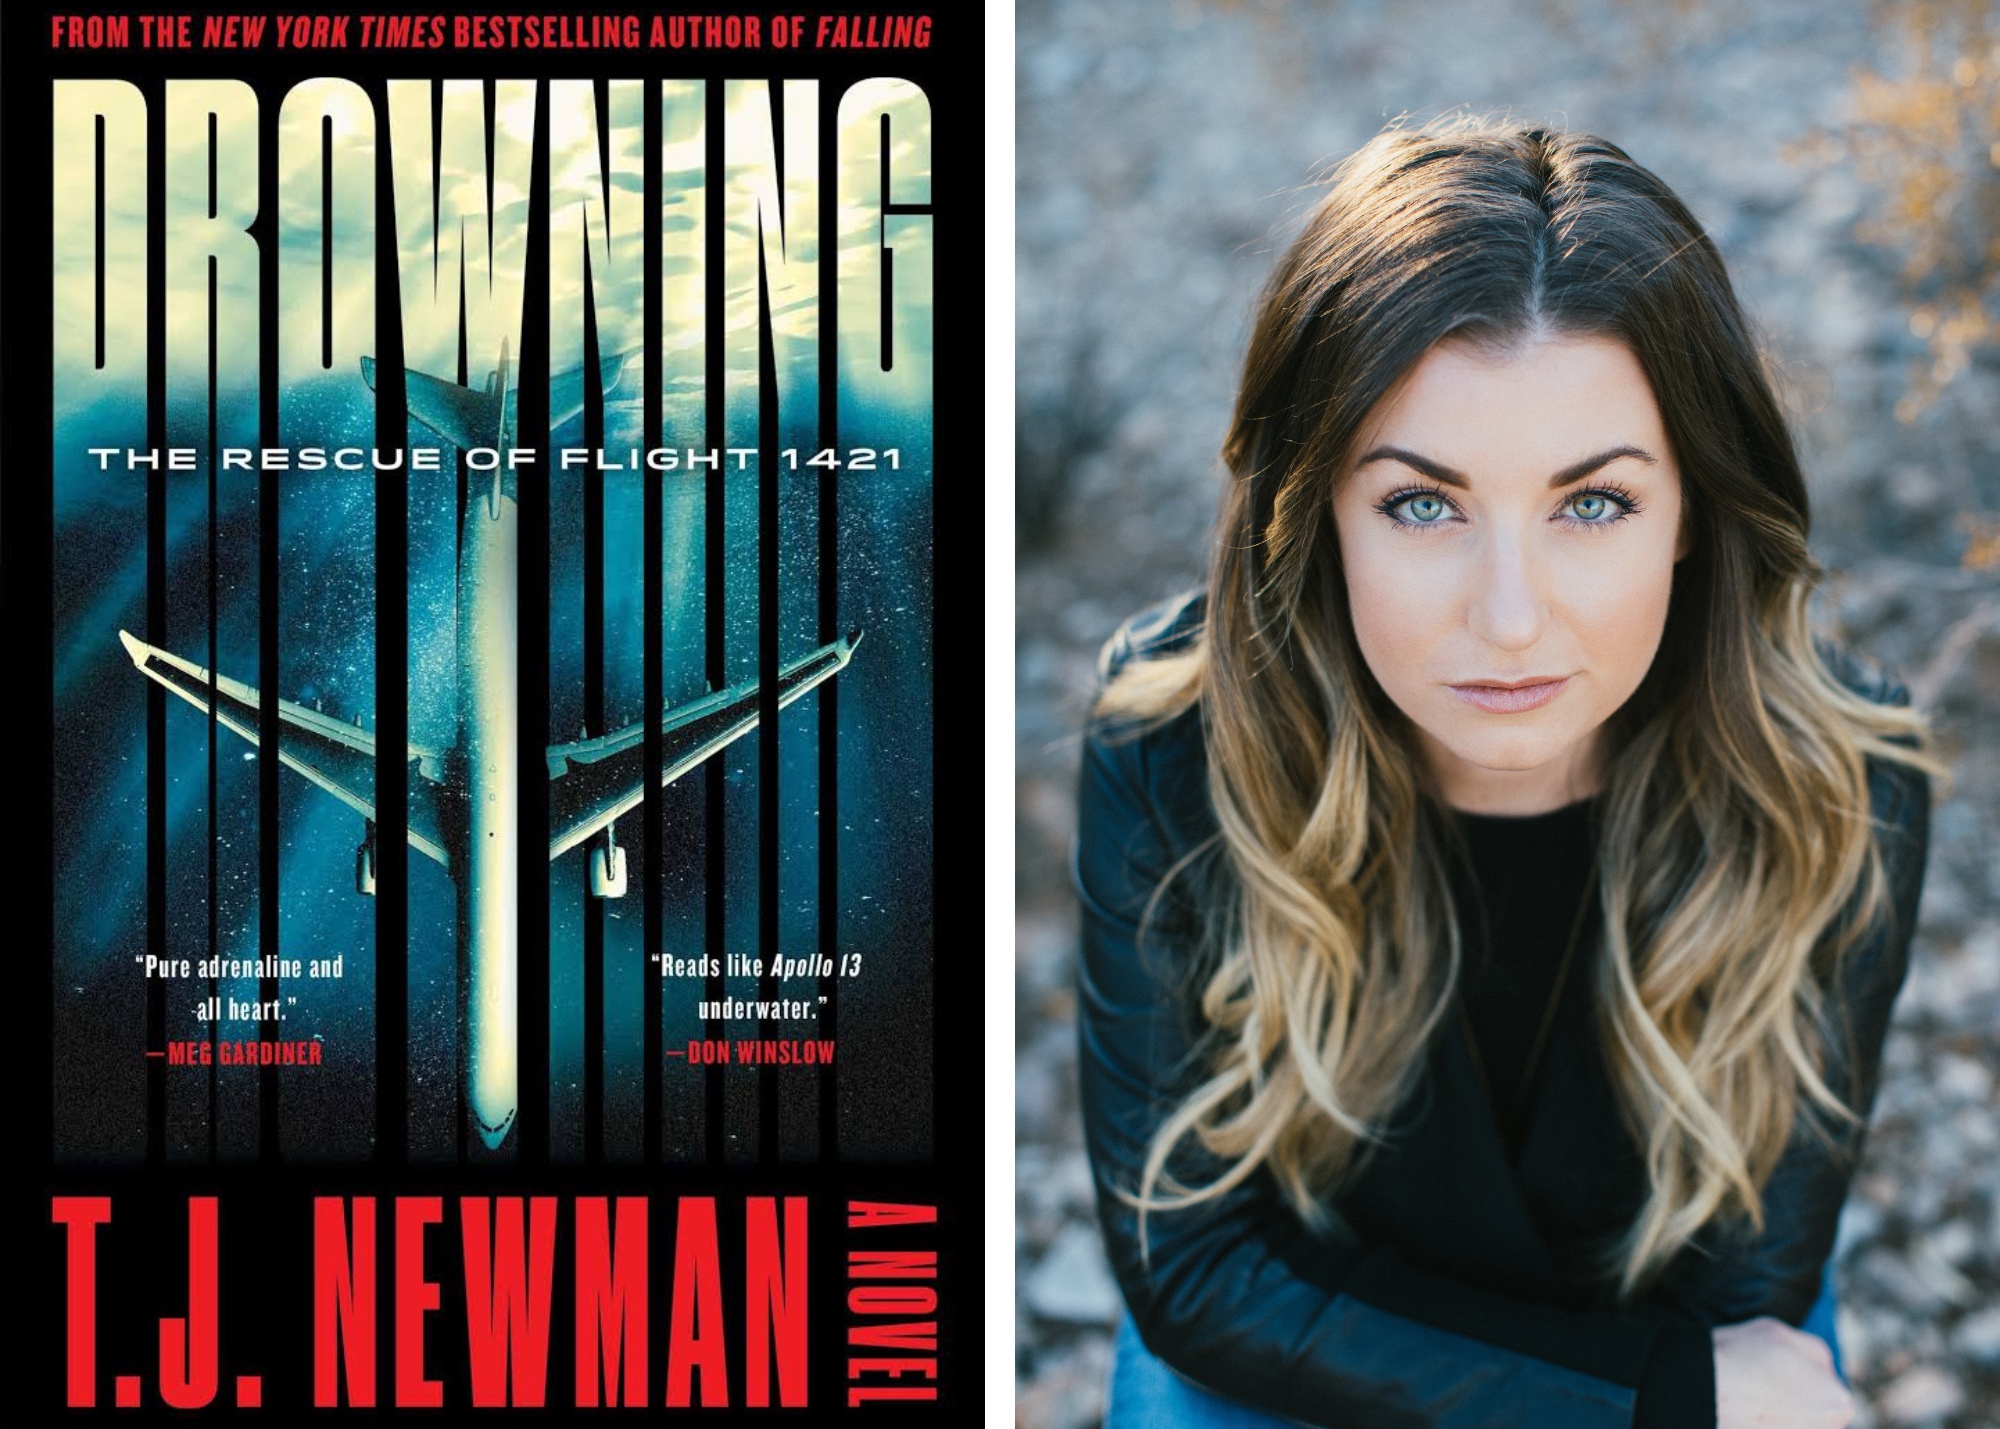 Drowning book cover and headshot of TJ Newman